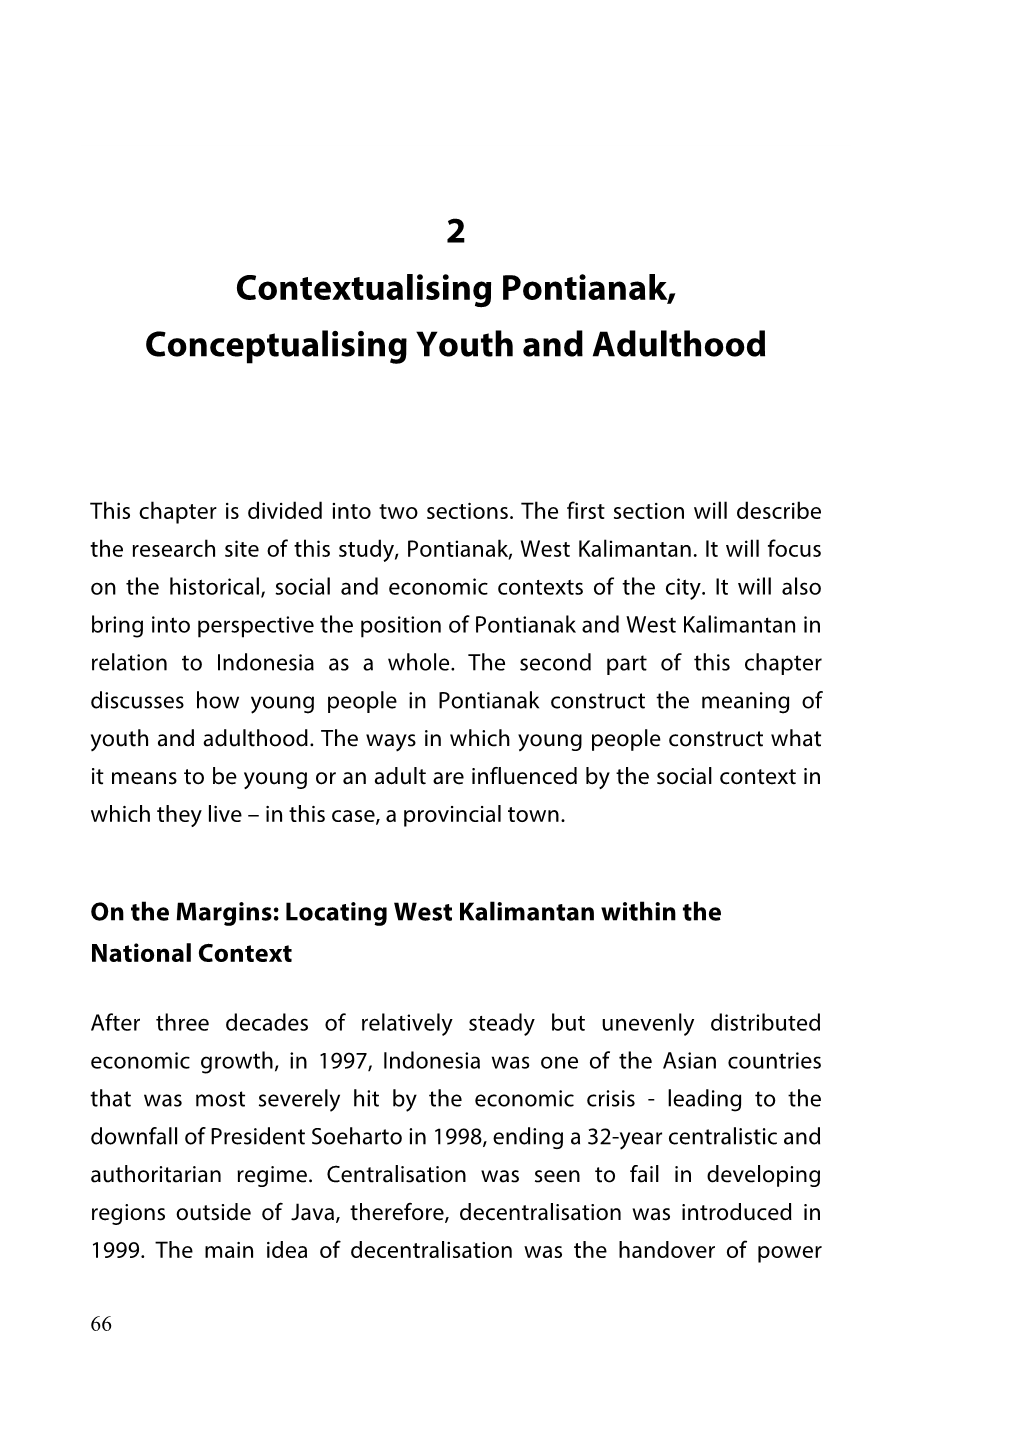 2 Contextualising Pontianak, Conceptualising Youth and Adulthood